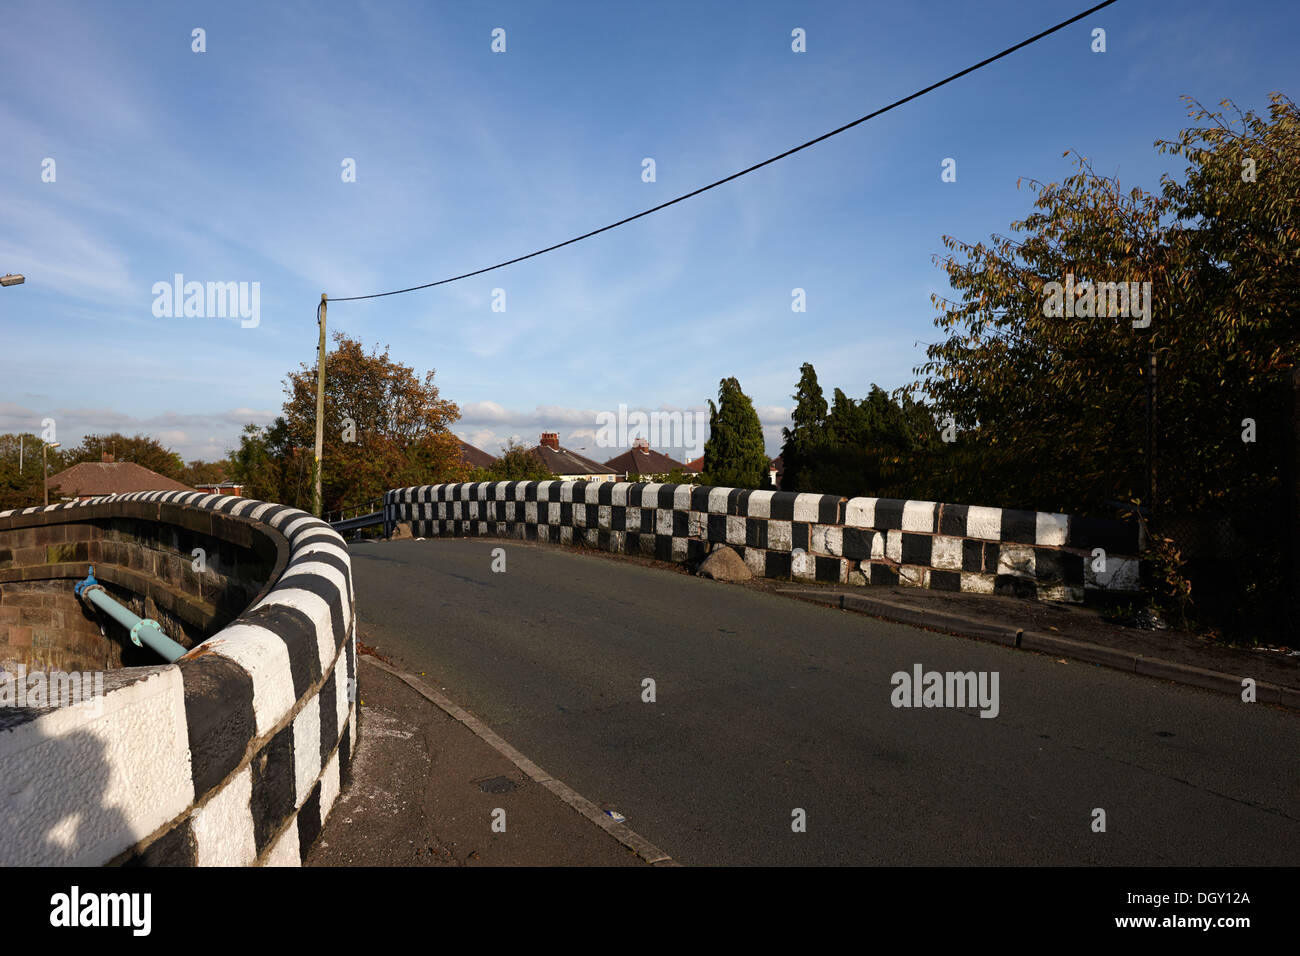 blue anchor bridge no 8 on liverpool leeds canal main line at aintree Stock Photo